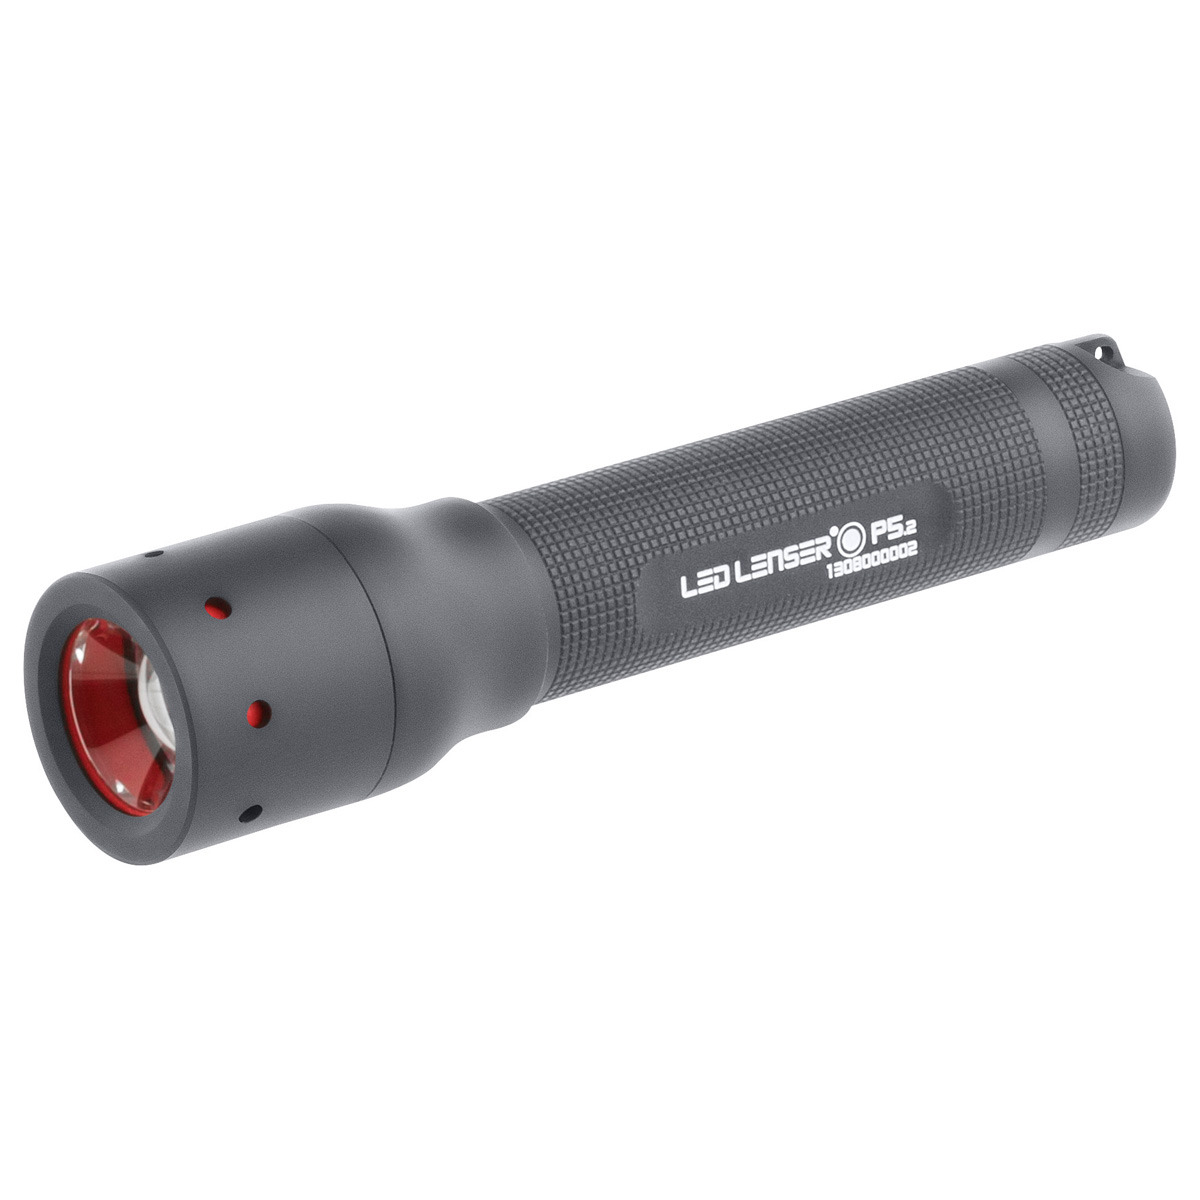 Led Lenser Torch P5.2 with Nylon Pouch - The Most Essential Survival Gear / Equipment